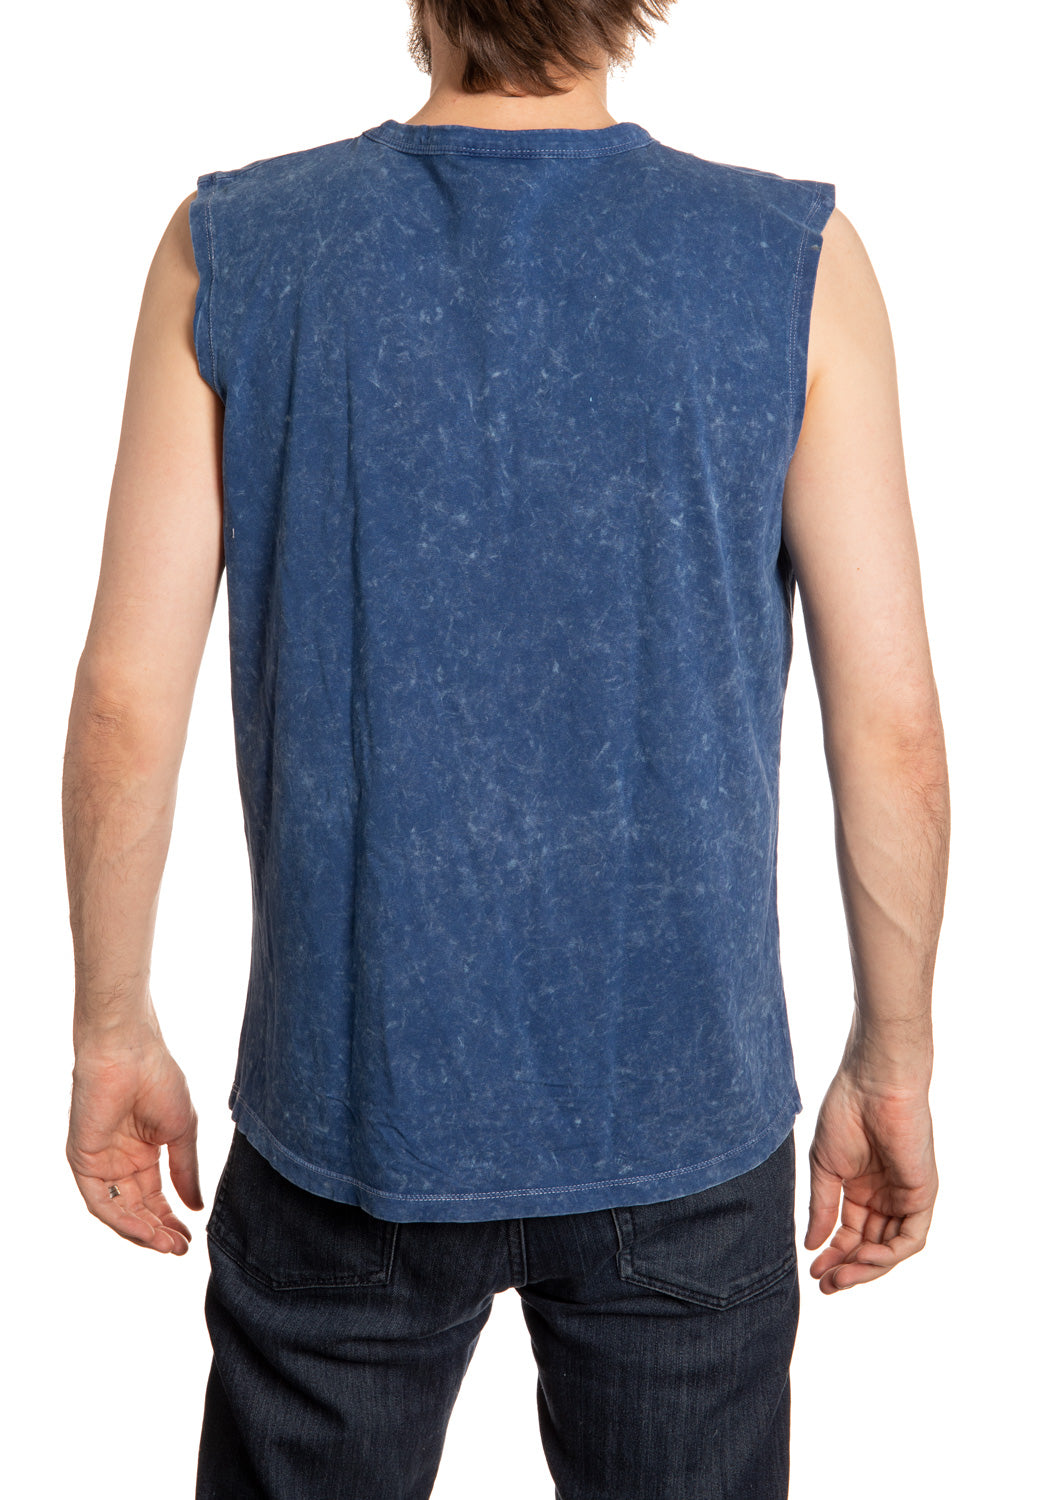 Montreal Canadiens Acid Washed Sleeveless Shirt Back View